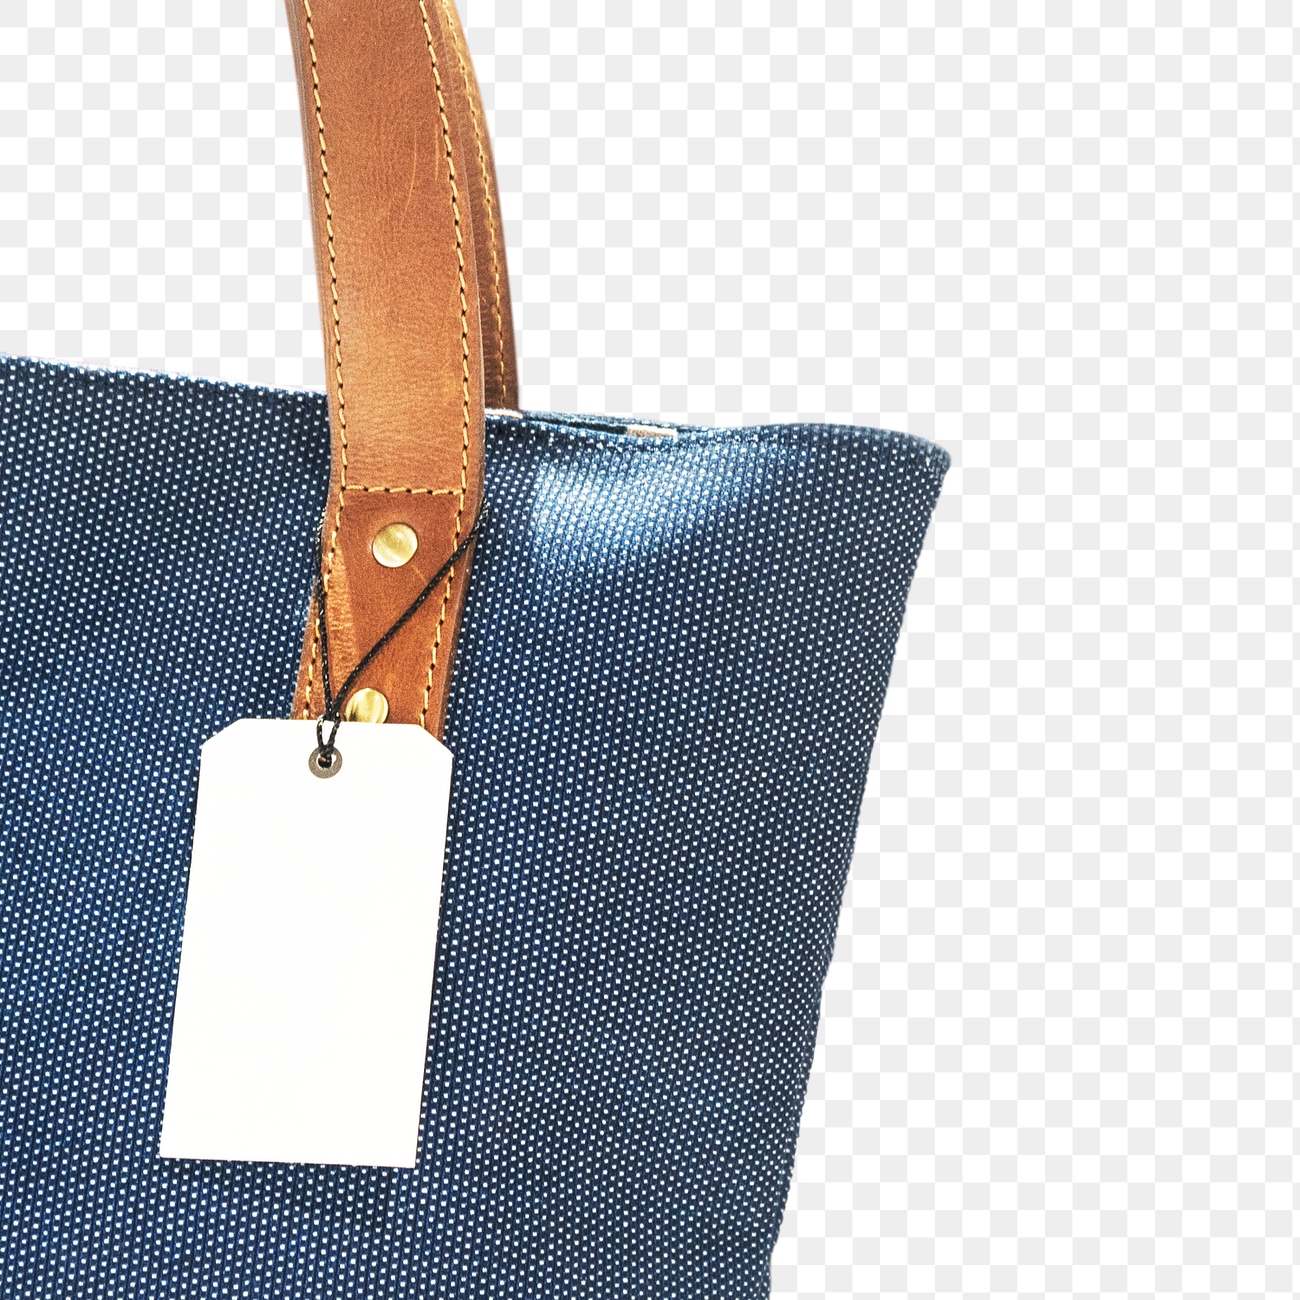 A handbag with branding tag | Free PNG Sticker - rawpixel